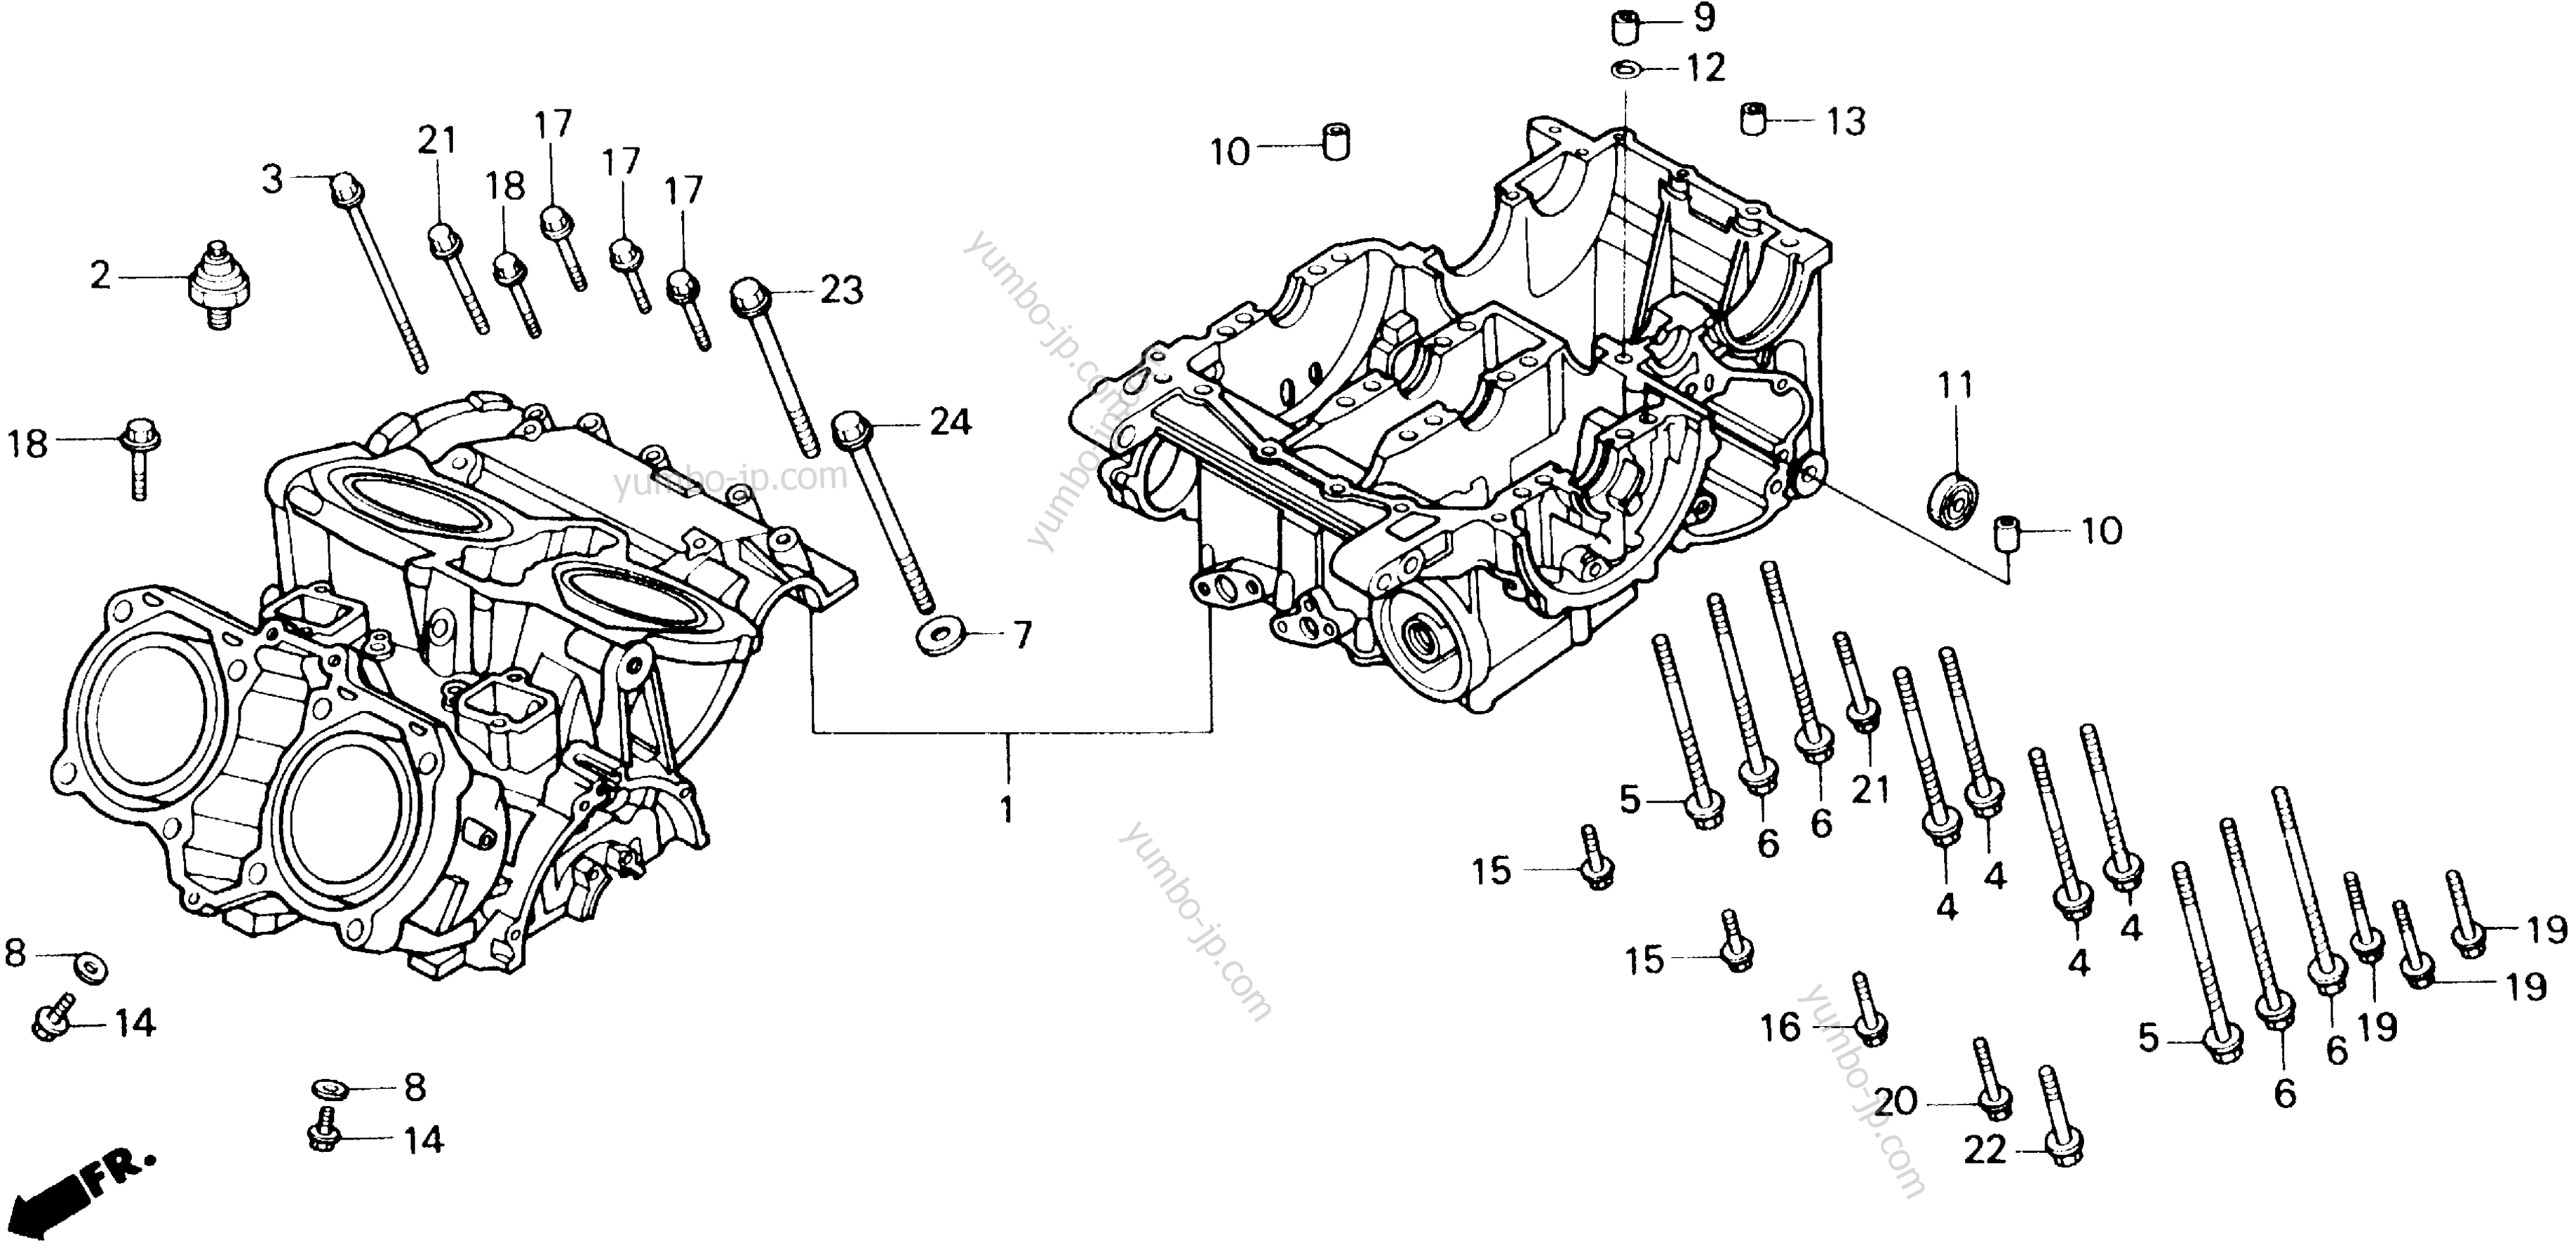 CRANKCASE for motorcycles HONDA VFR700F2 A 1986 year